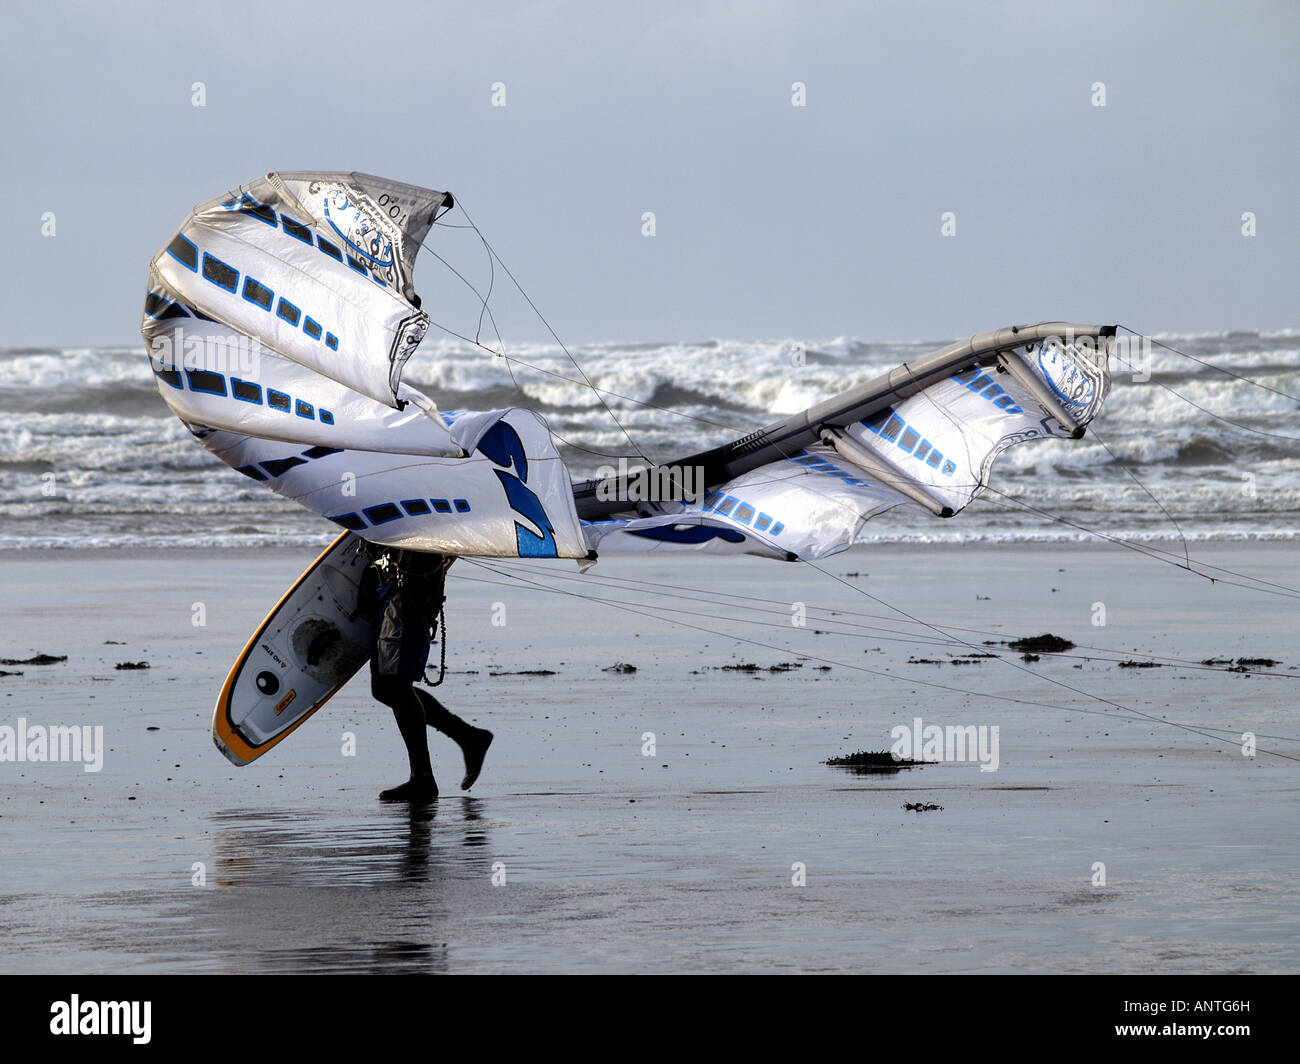 Kite surfer, struggling with his kite on a very windy day, after coming out of the sea. Stock Photo